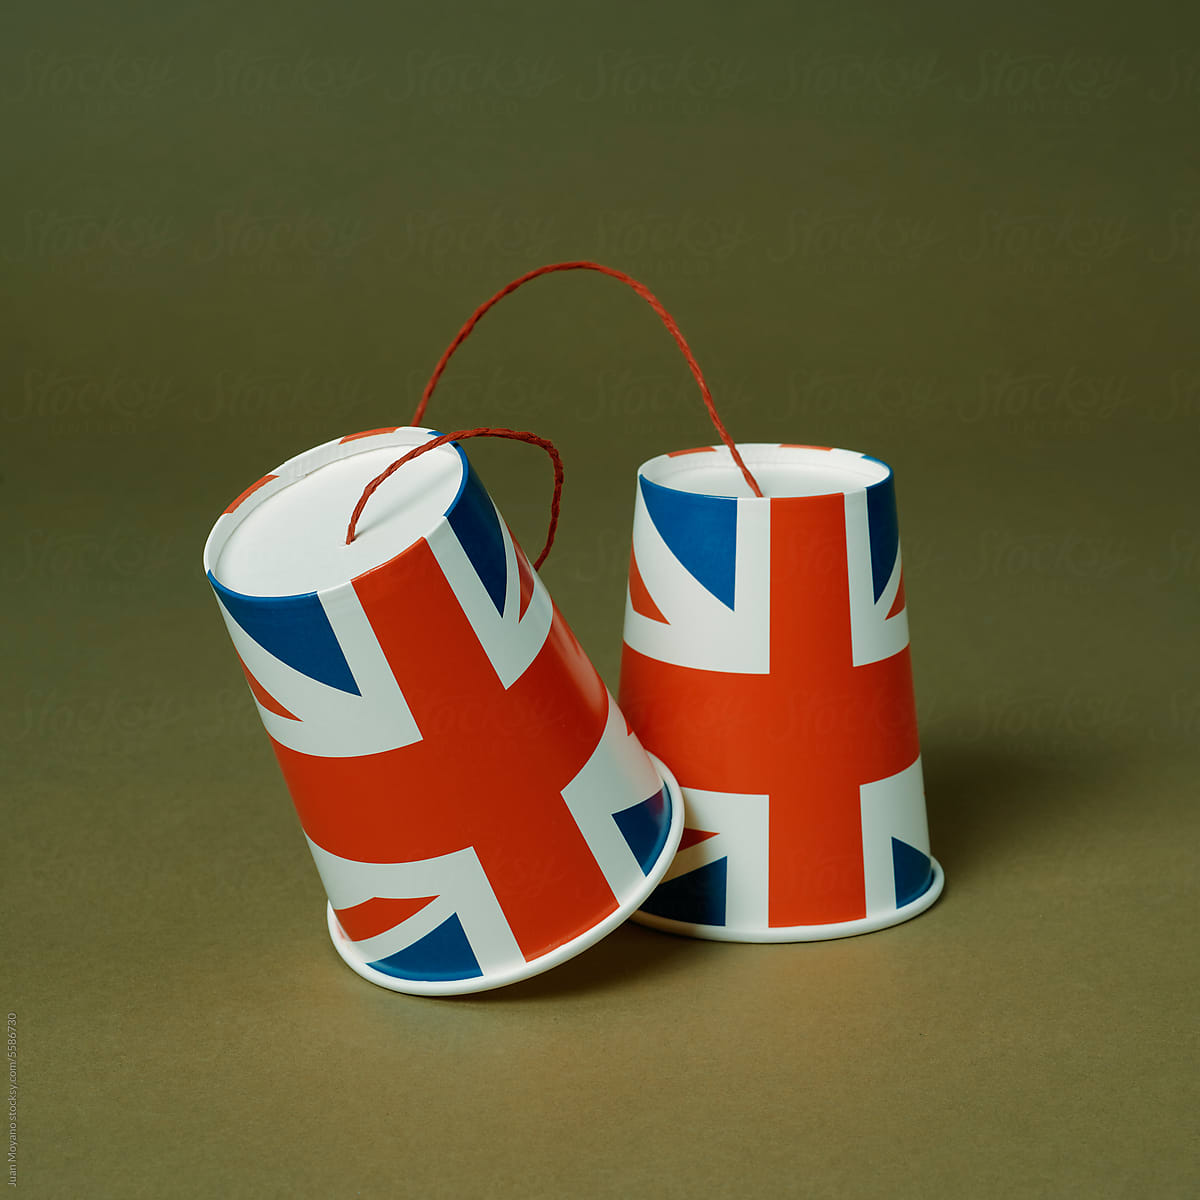 string telephone patterned with the flag of the United Kingdom